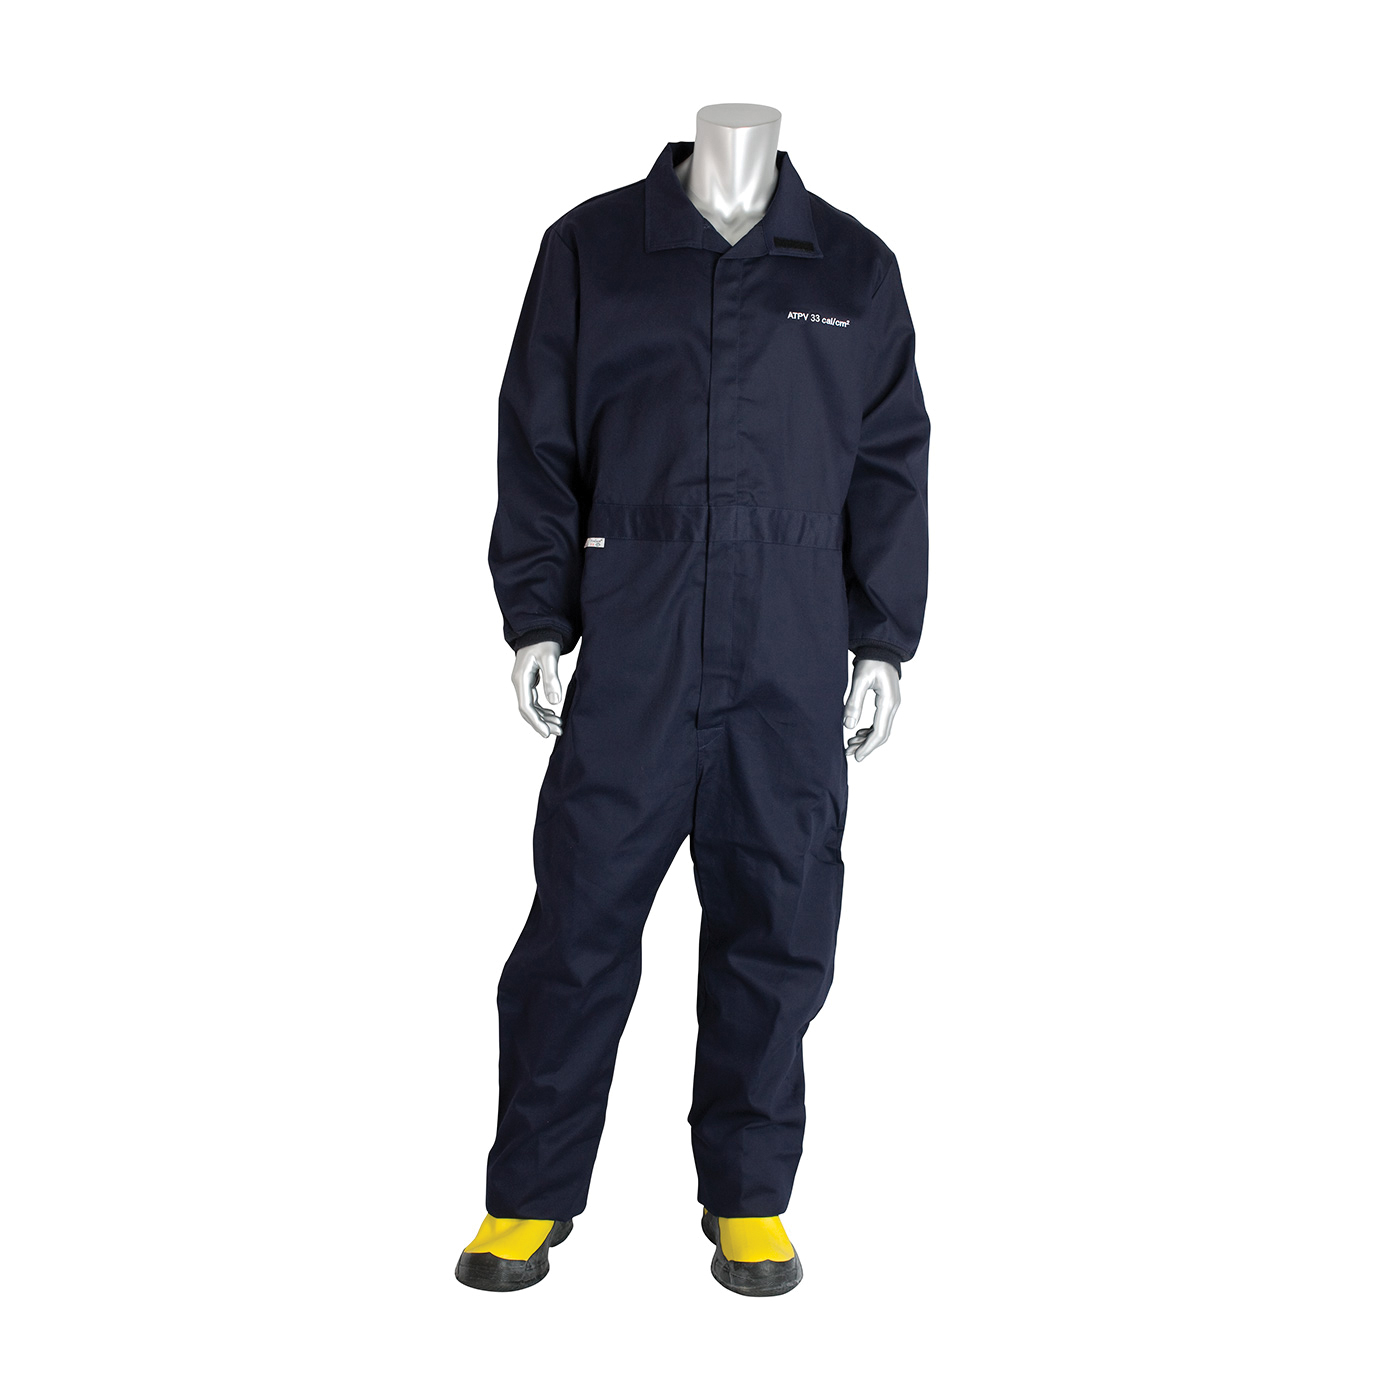 PIP® 9100-52758/5XL Flame Resistant Coverall, 5XL, Navy, 88% Cotton/12% Nylon, 64 to 66 in Chest, 32 in L Inseam